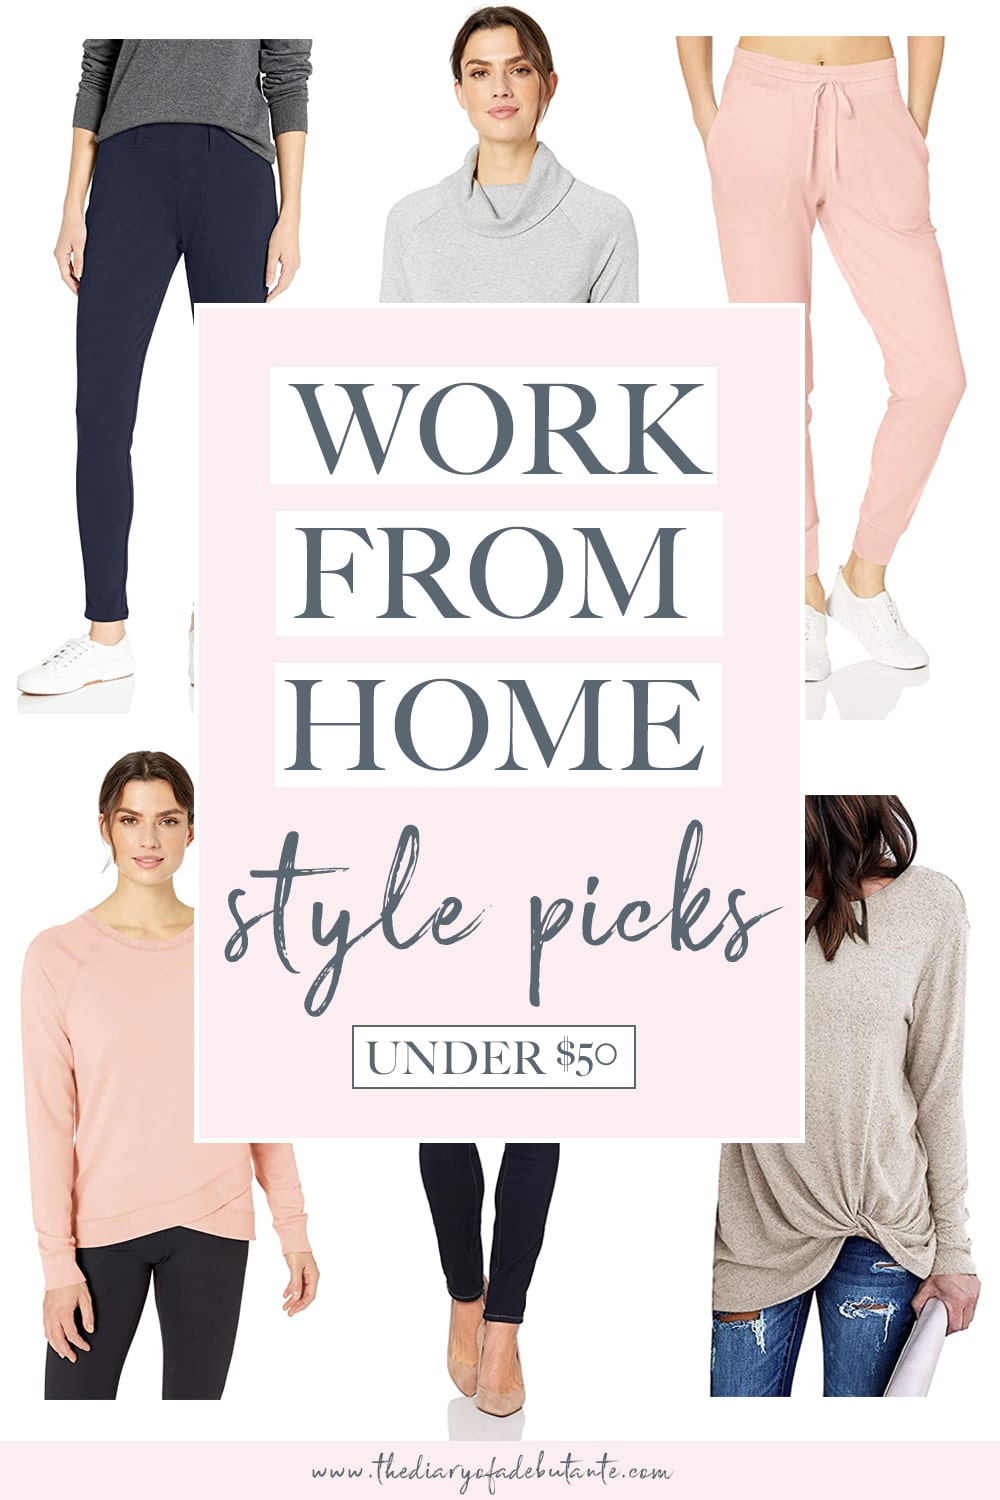 Affordable fashion blogger Stephanie Ziajka shares work from home style advice, including her picks for the best loungewear on Amazon under 50, on Diary of a Debutante!